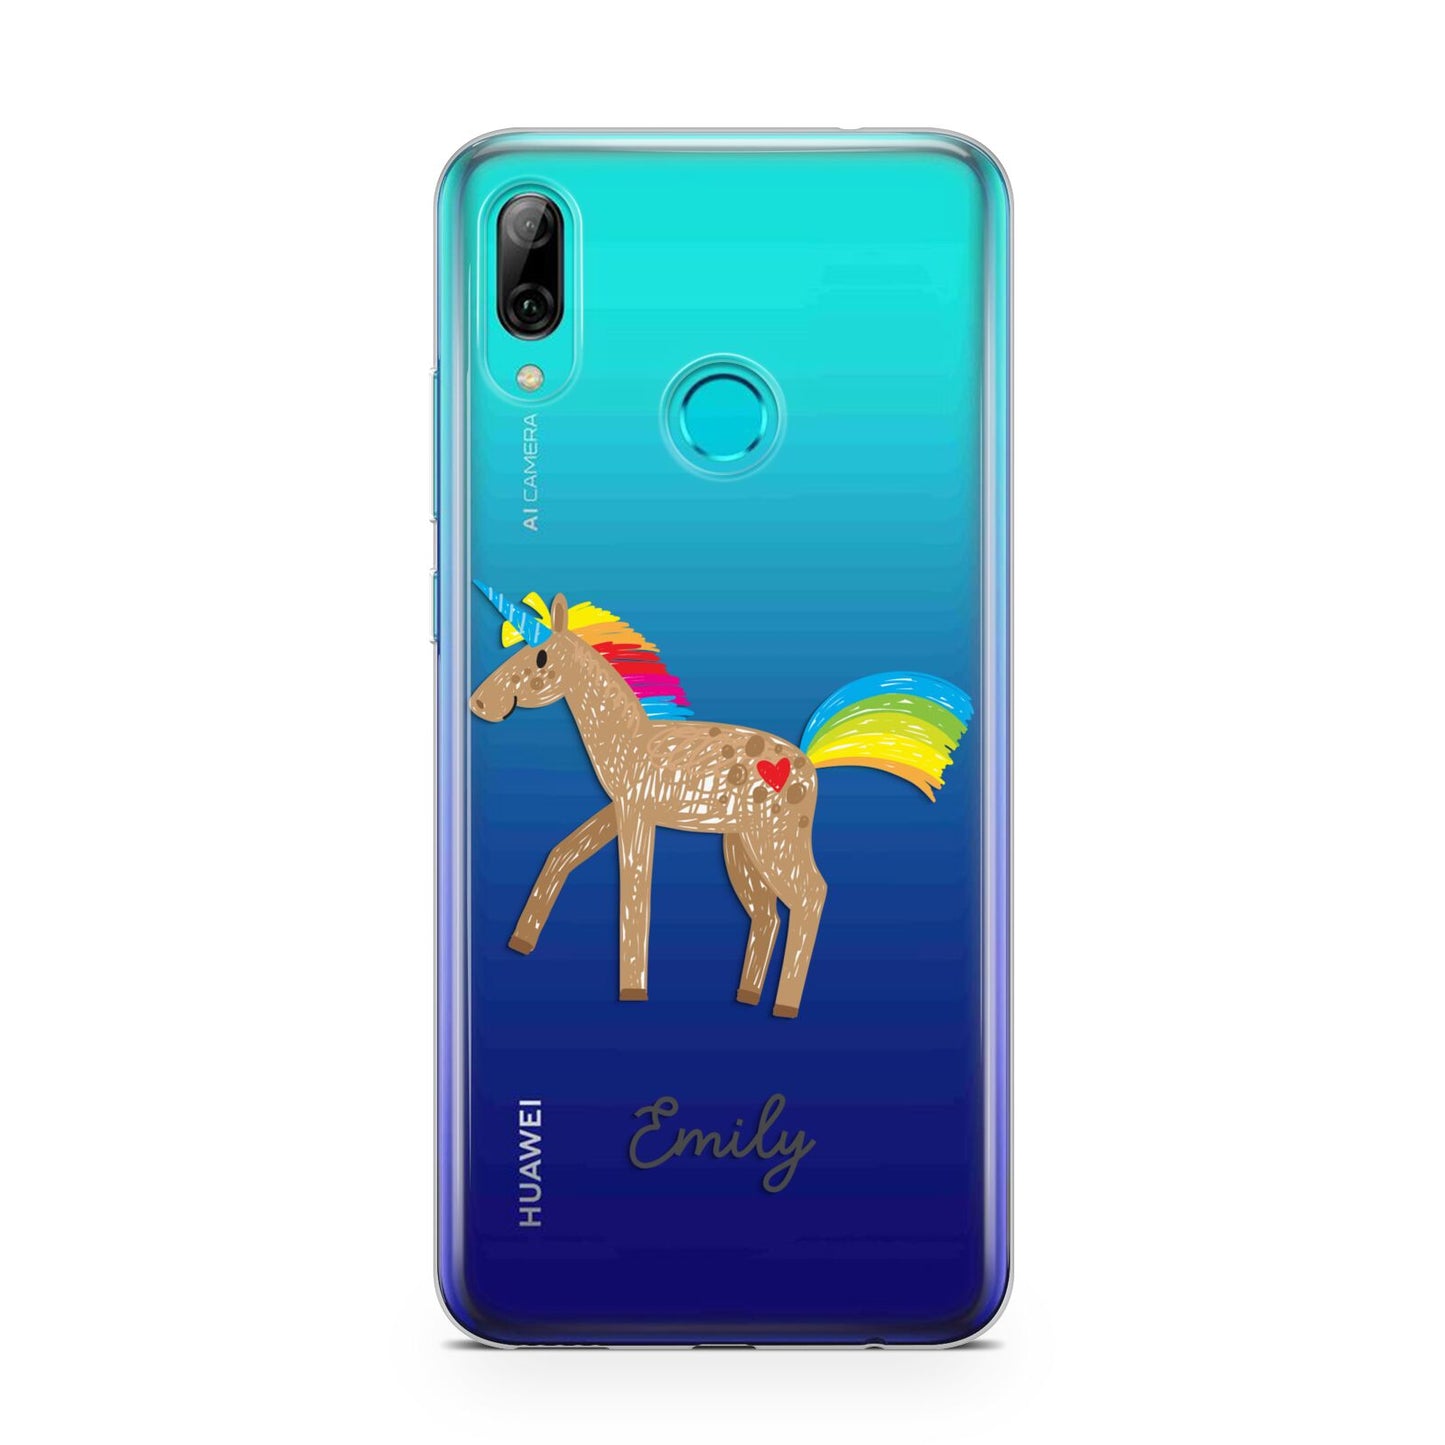 Personalised Unicorn with Name Huawei P Smart 2019 Case